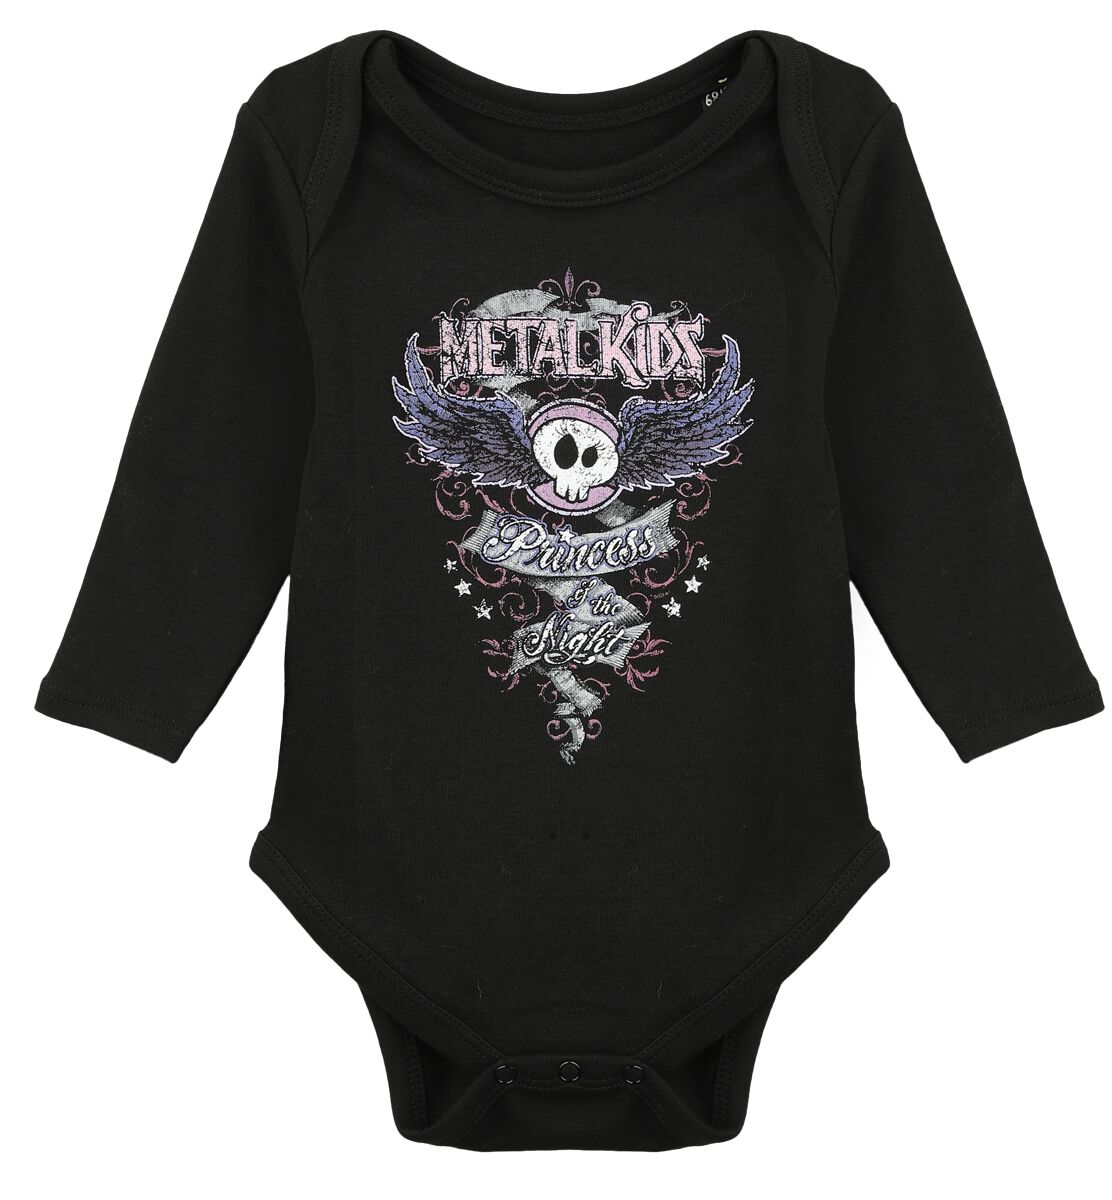 Image of Body di Metal Kids - ‘Princess of the Night’ long-sleeved body - 56/62 a 80/86 - ragazze - nero/multicolore